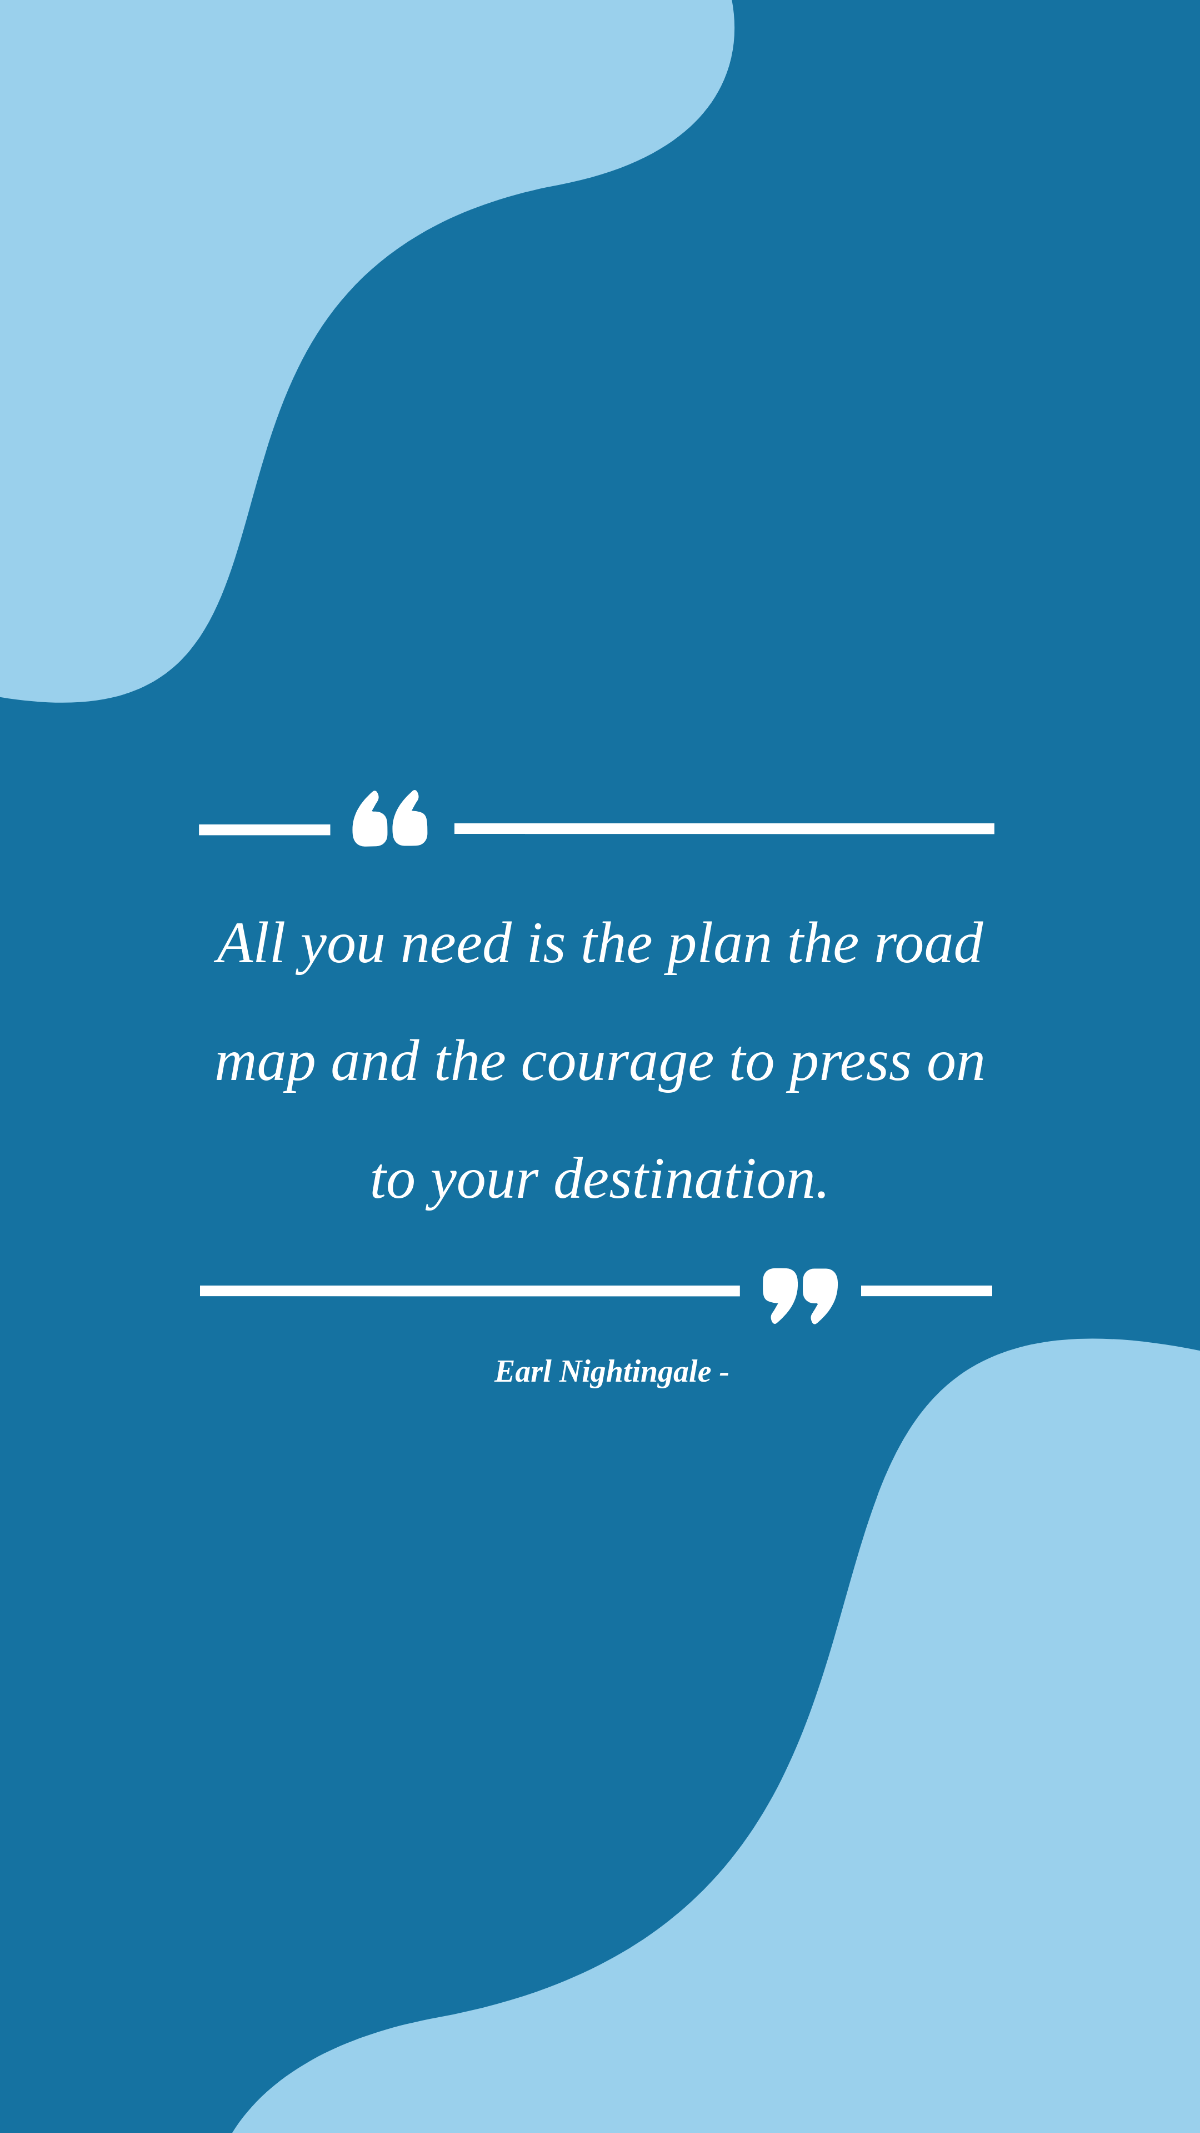 Earl Nightingale - All you need is the plan the road map and the courage to press on to your destination. Template